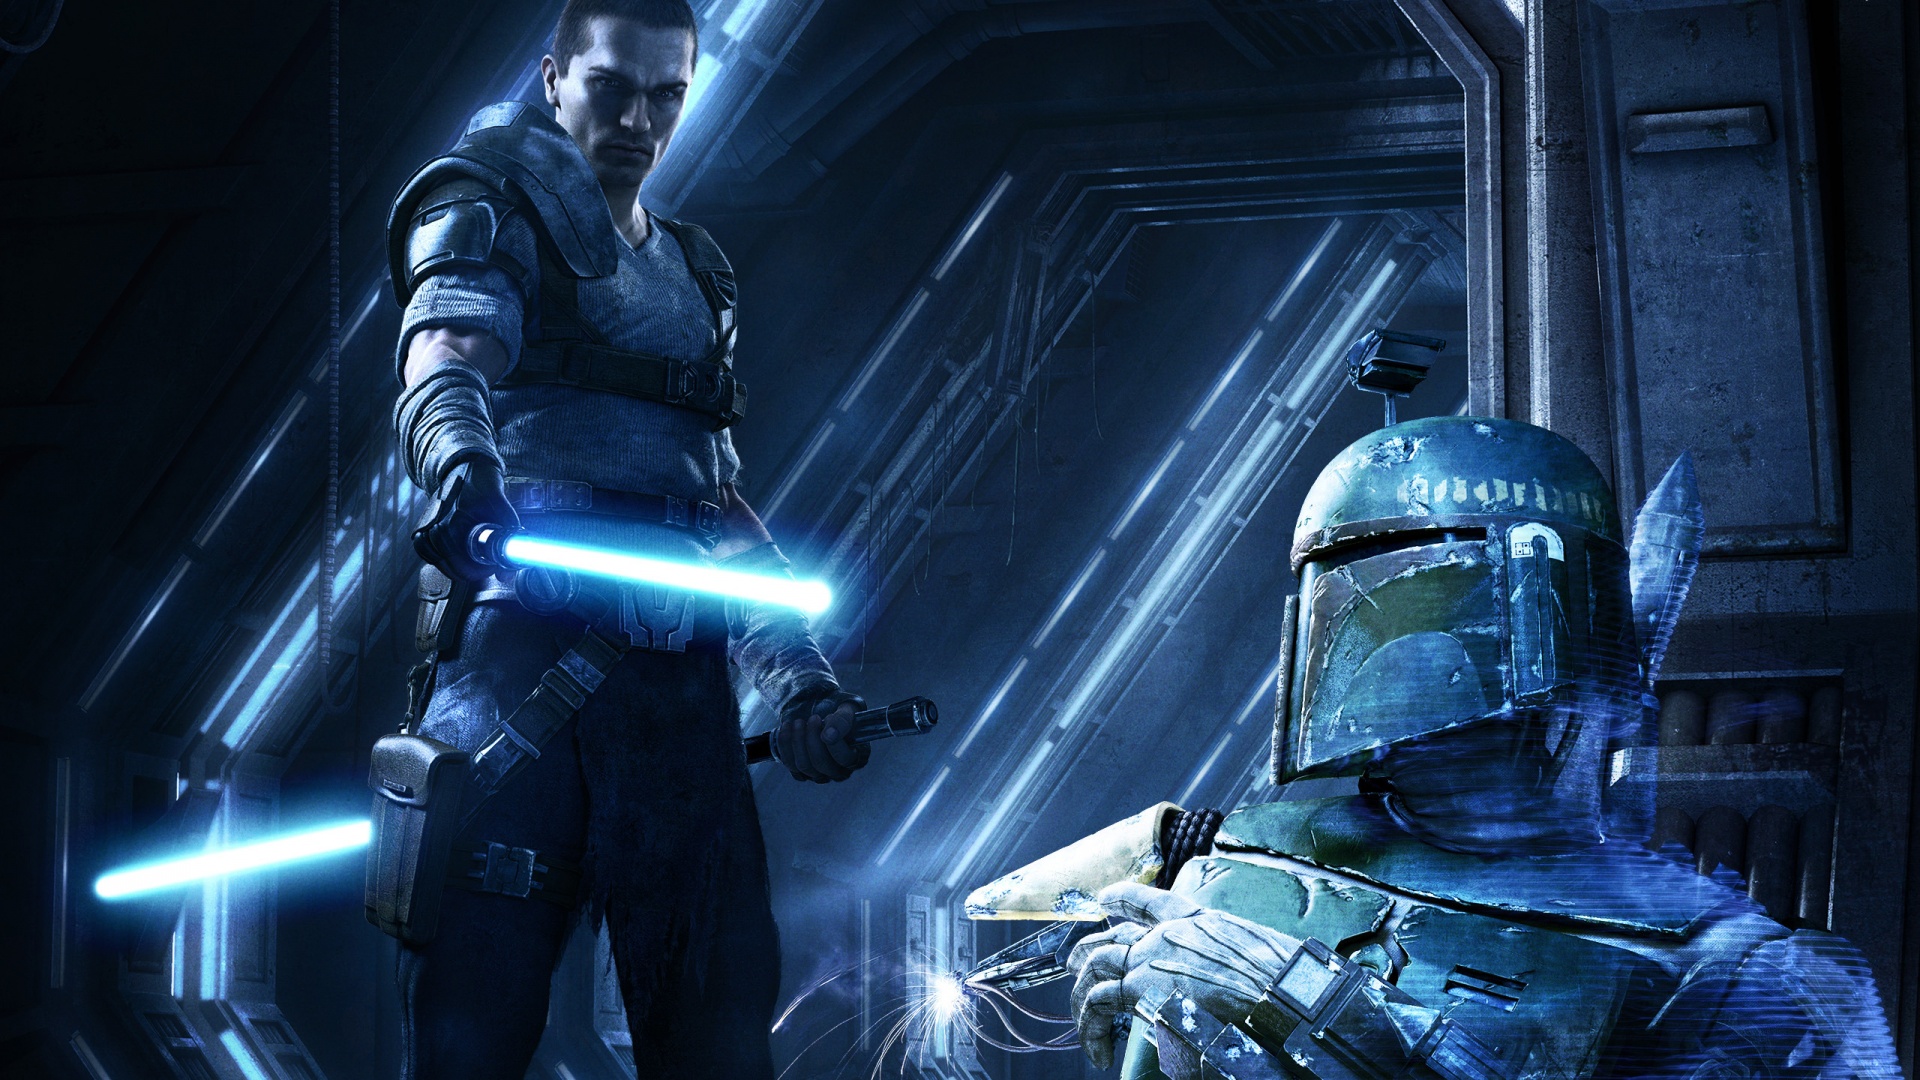 star wars wallpaper pc,action adventure game,pc game,fictional character,shooter game,games